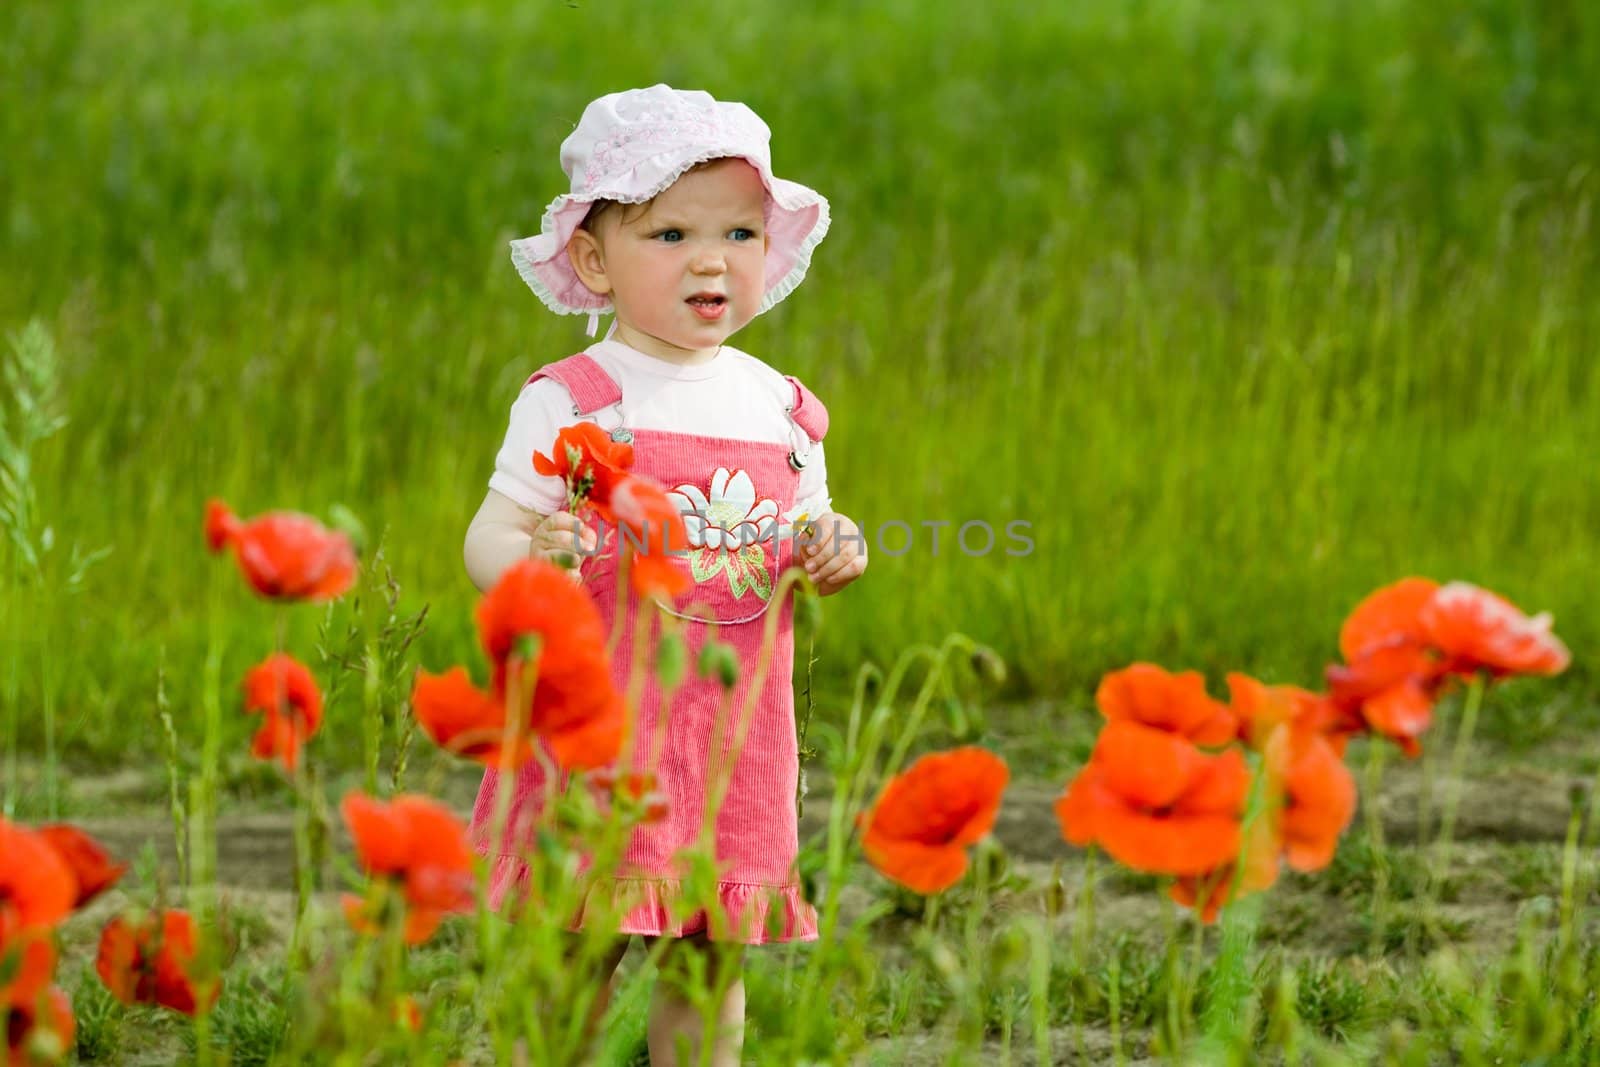 An image of baby amongst field with flowers